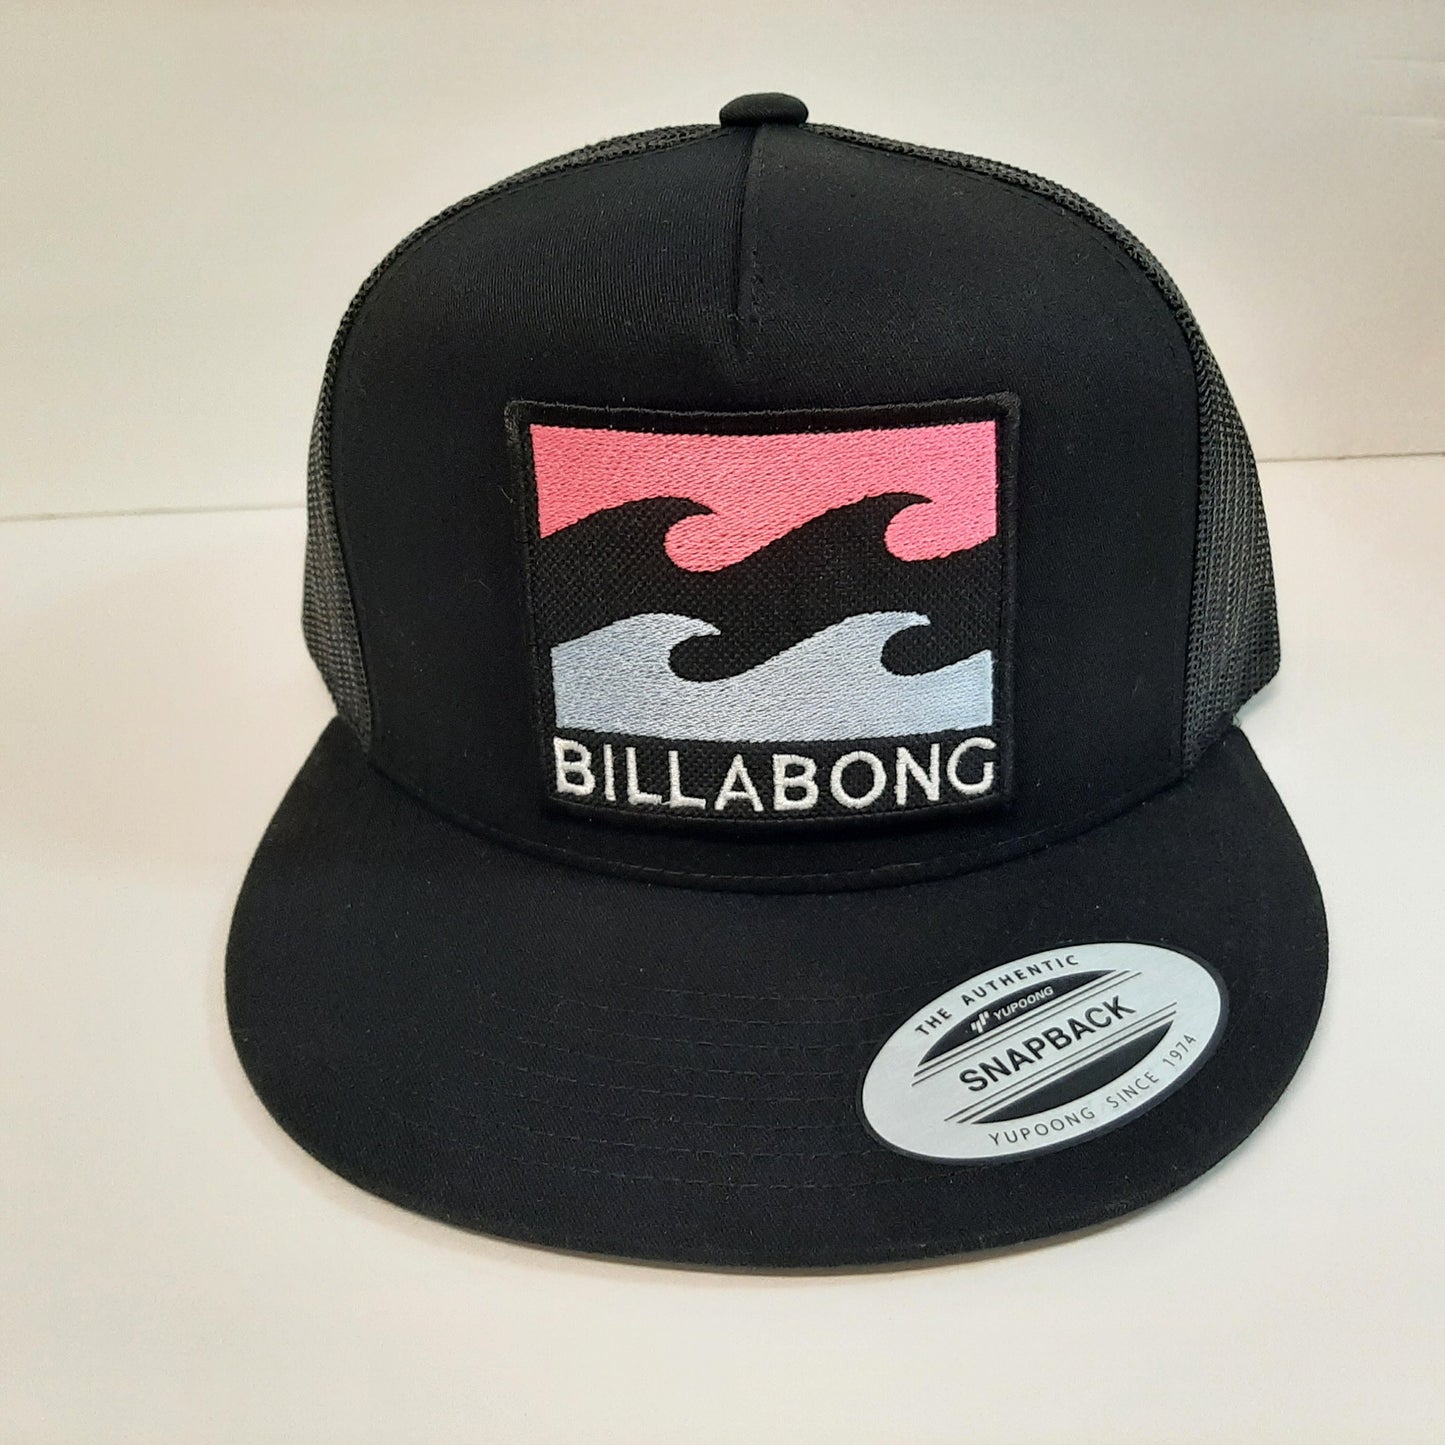 Yupoong Embroidered Patch Trucker Mesh Cap Billabong Hat Black Snapback